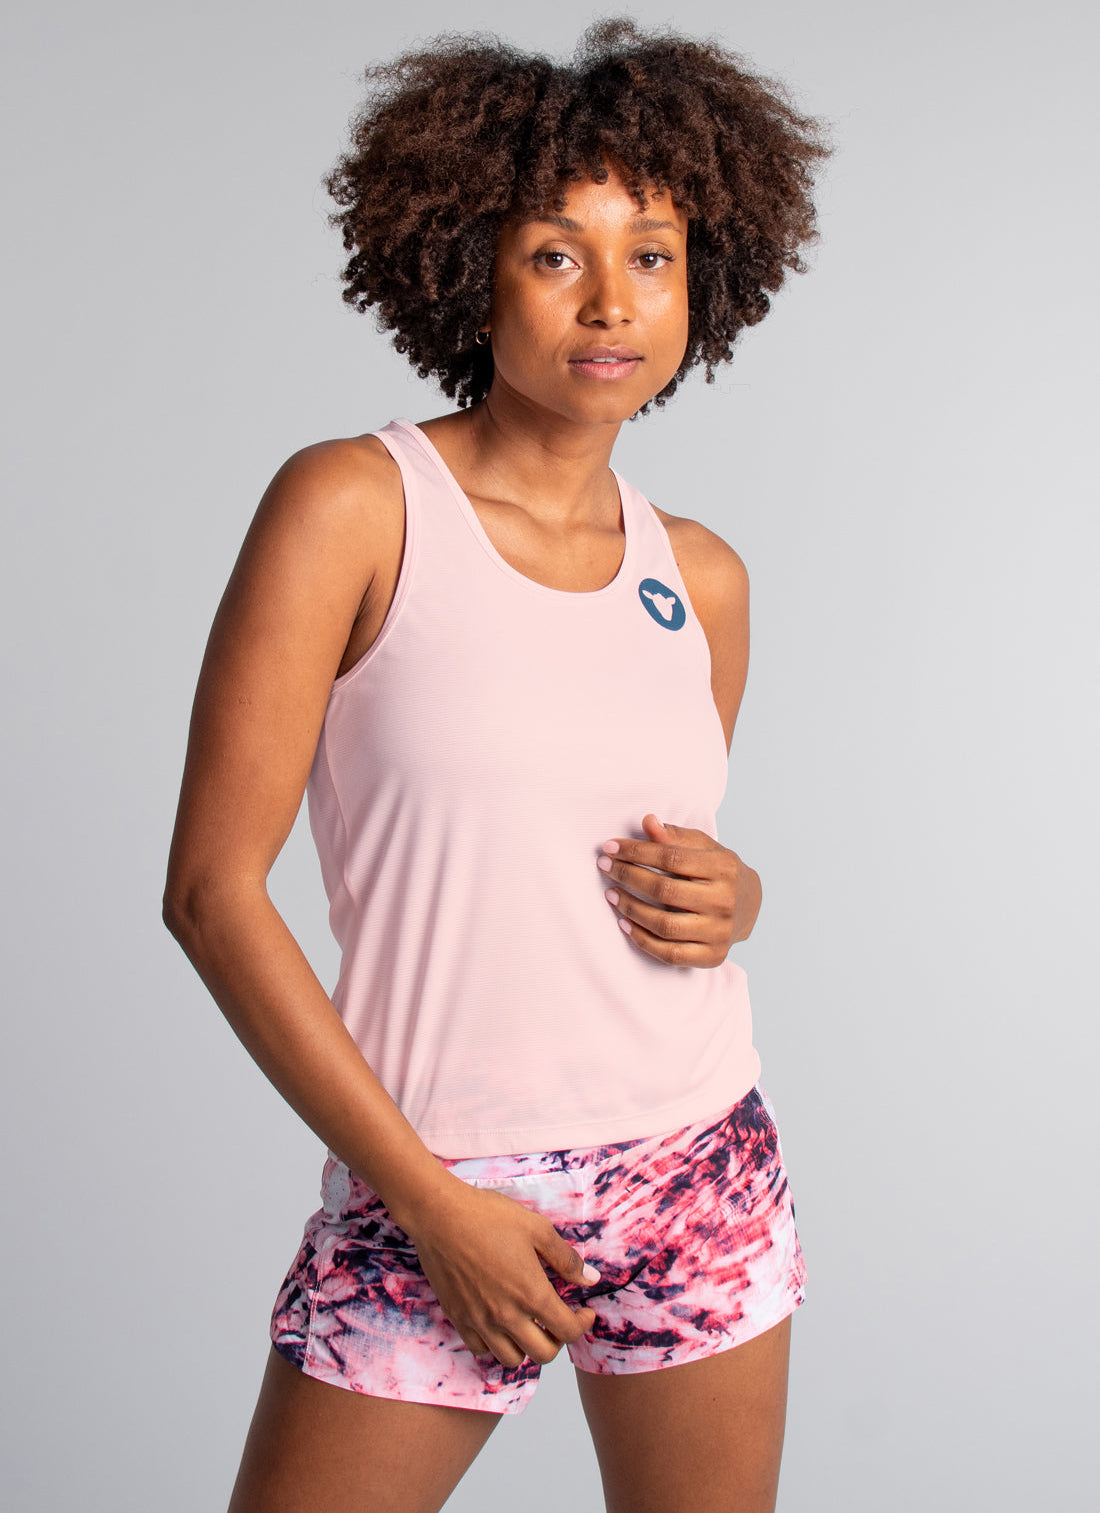 Women's Dry Singlet - Barely Pink